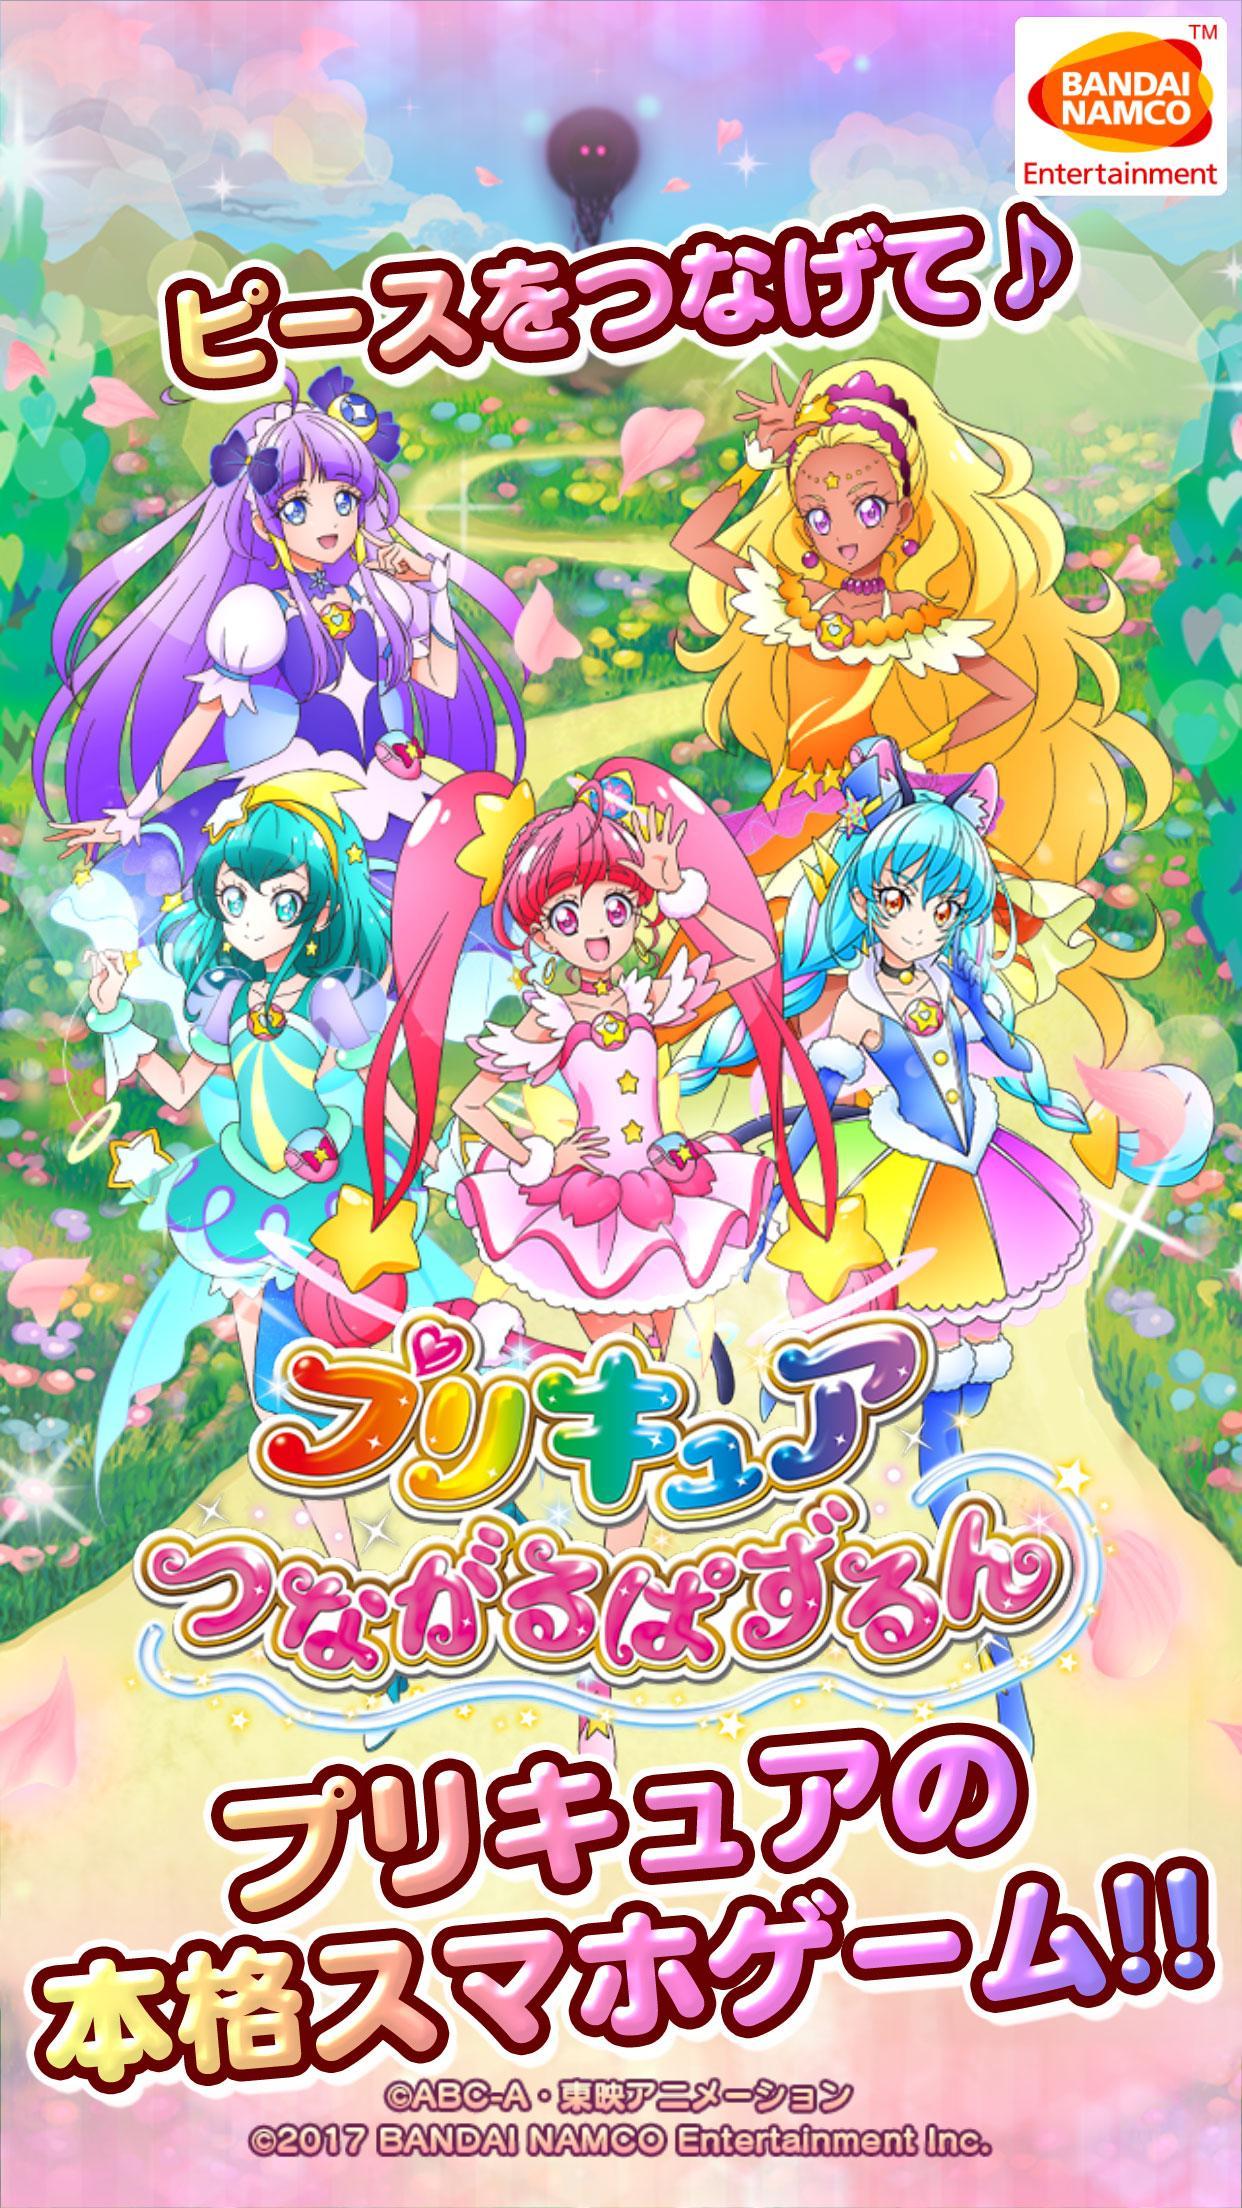 Screenshot 1 of Casse-tête connectable Pretty Cure 2.1.0